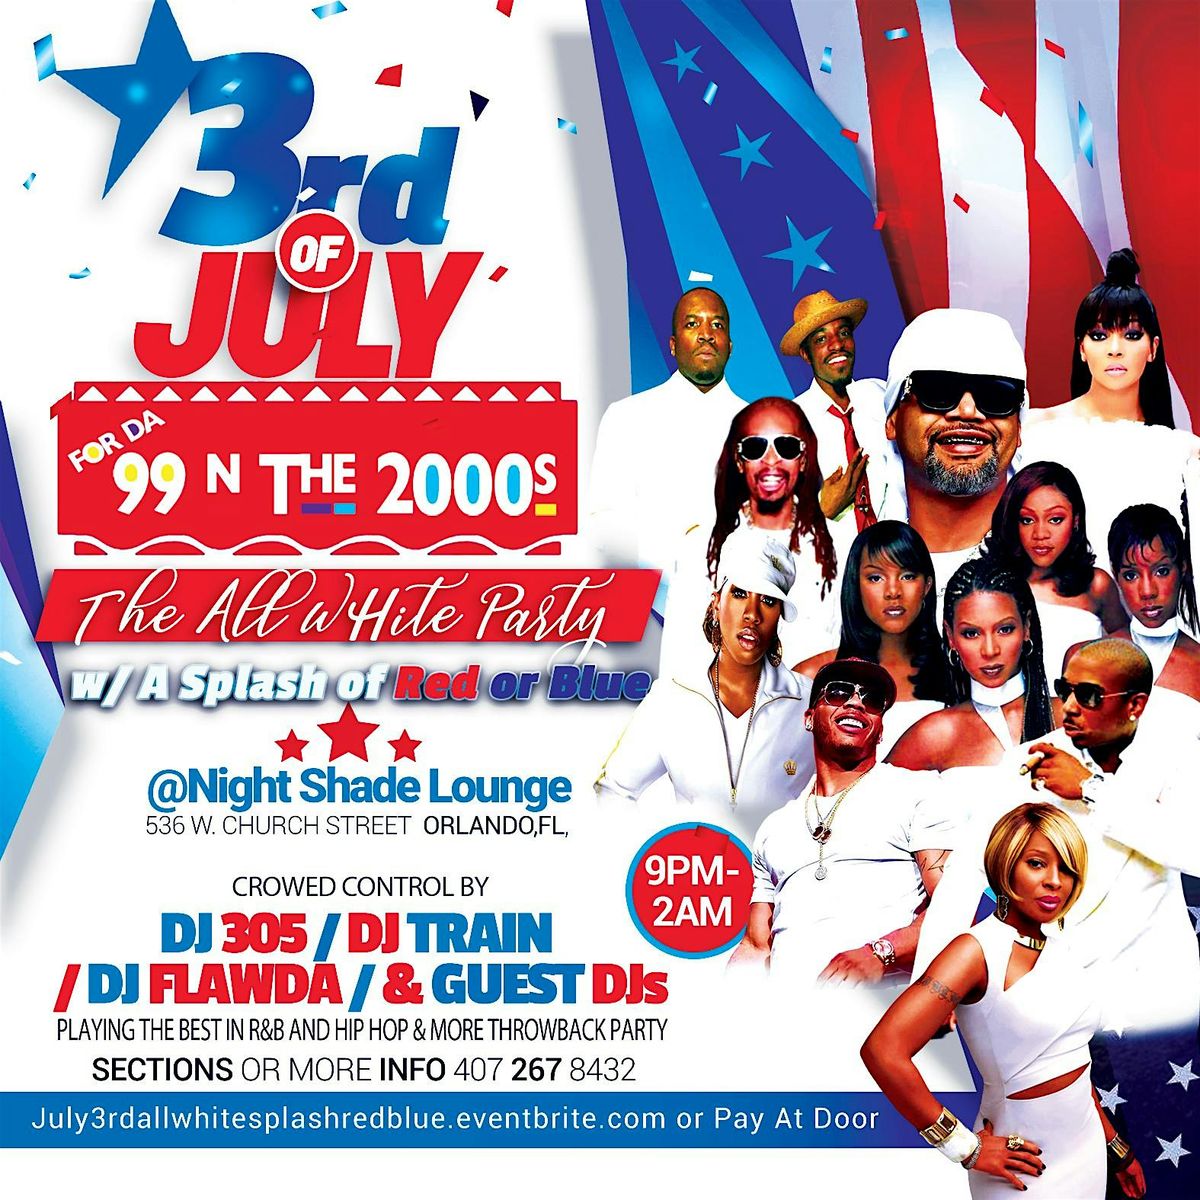 For Da 99 n The 2000s Presents: The All White Party w\/ A Splash of Red or Blue